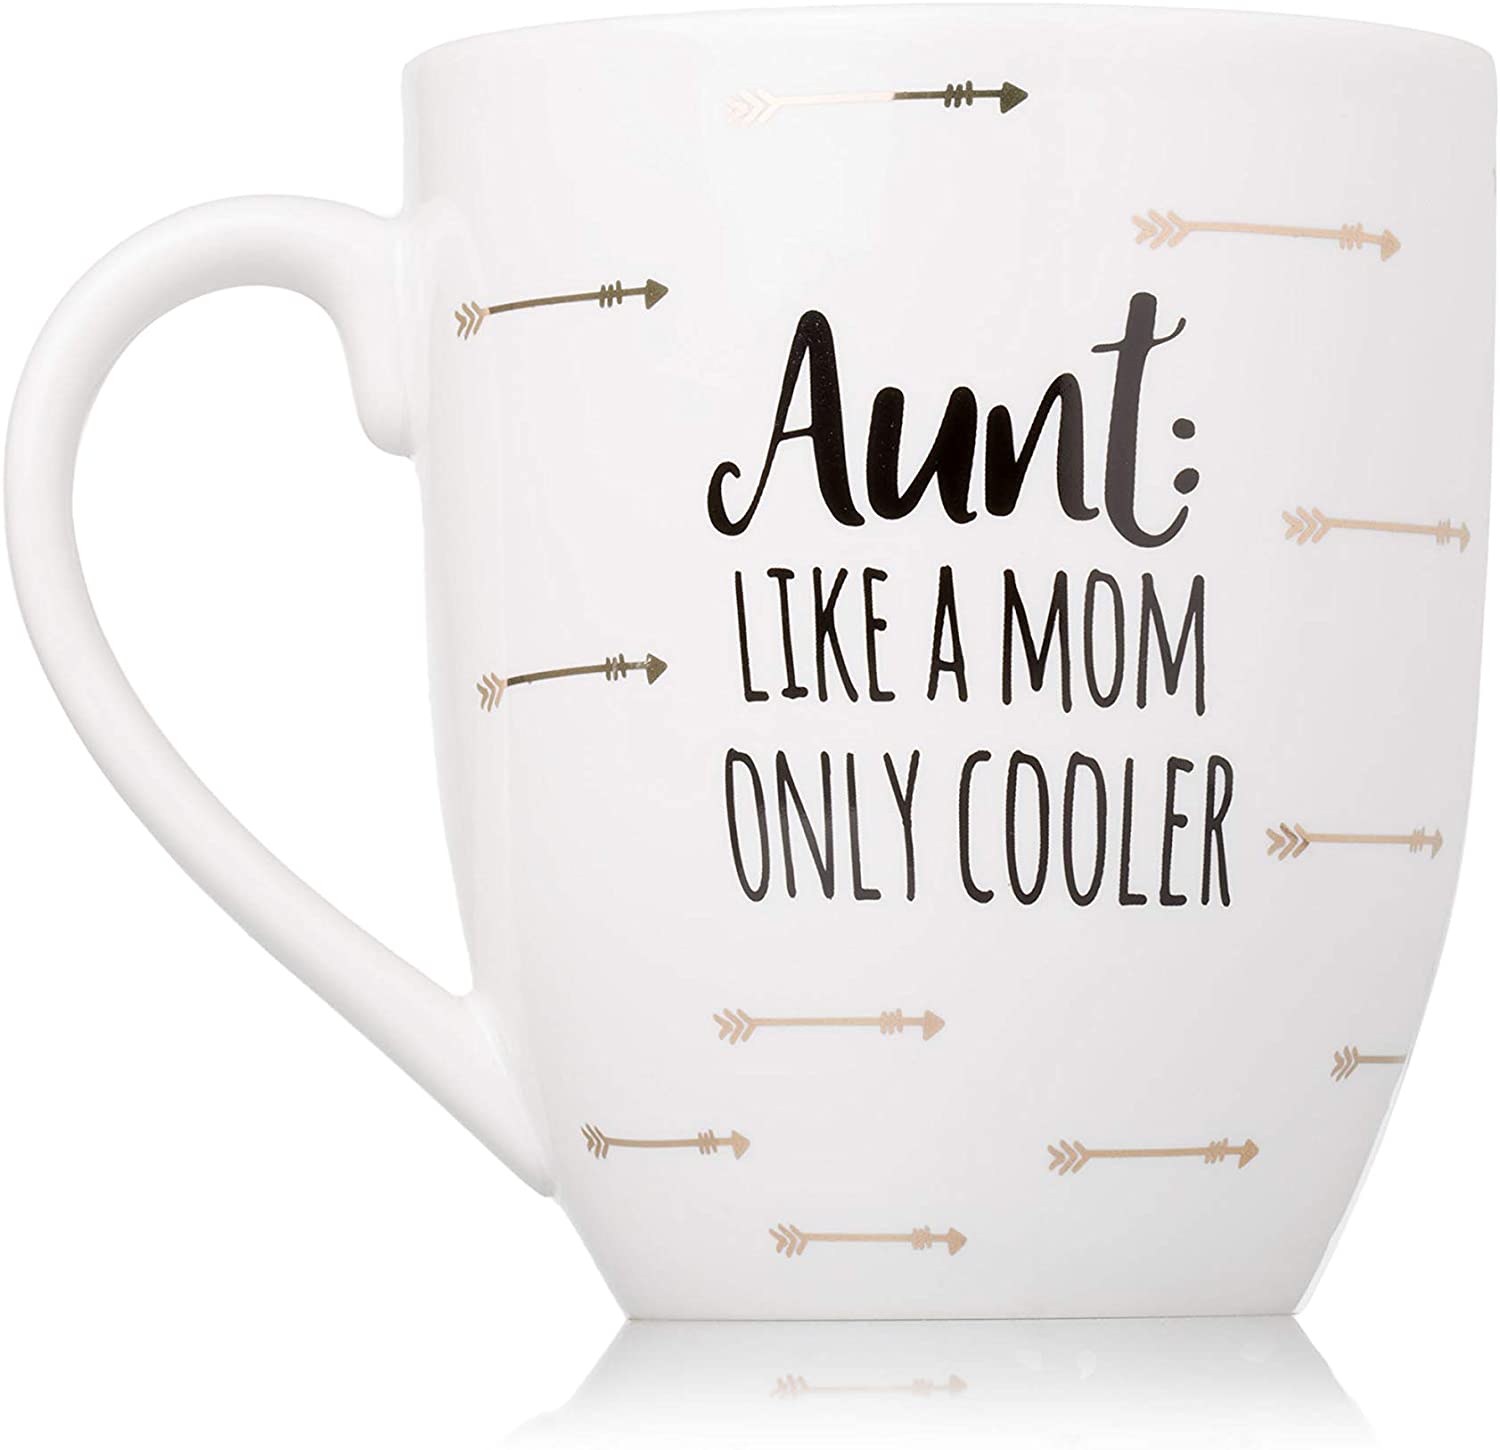 AUNT: LIKE A MOM ONLY COOLER